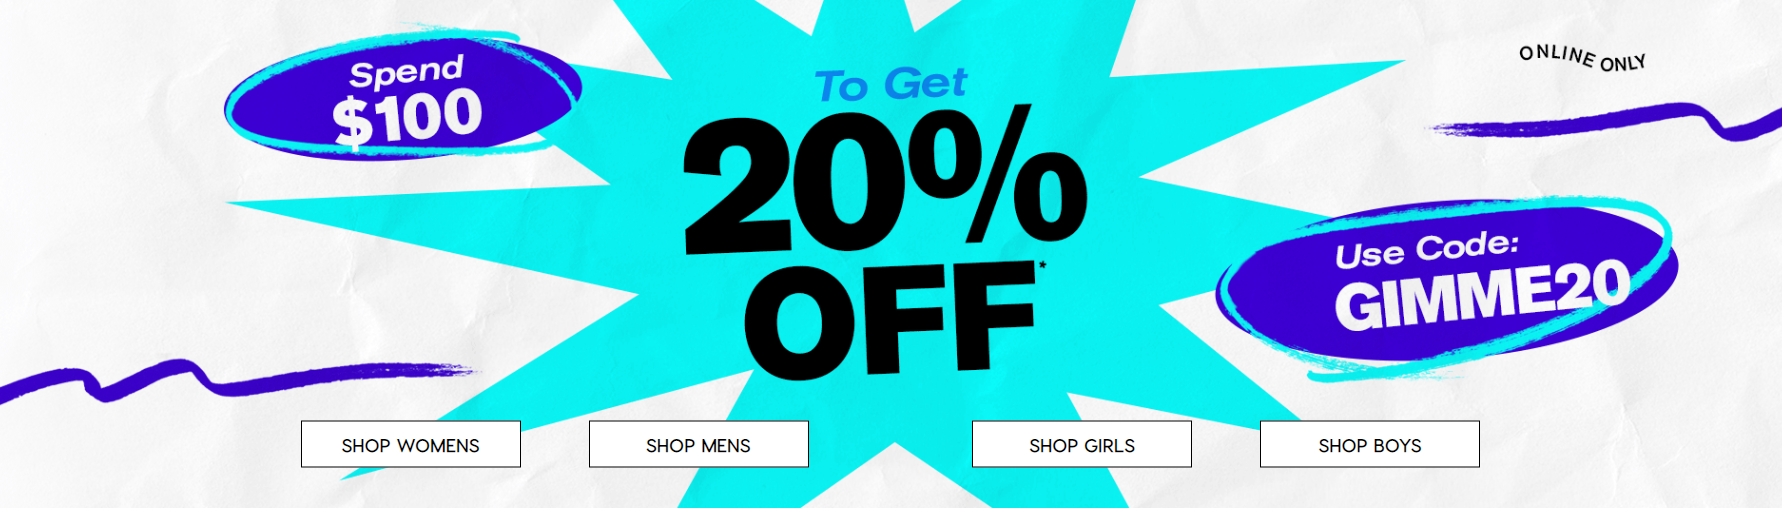 Extra 20% OFF when you spend $100 with promo code @ City Beach